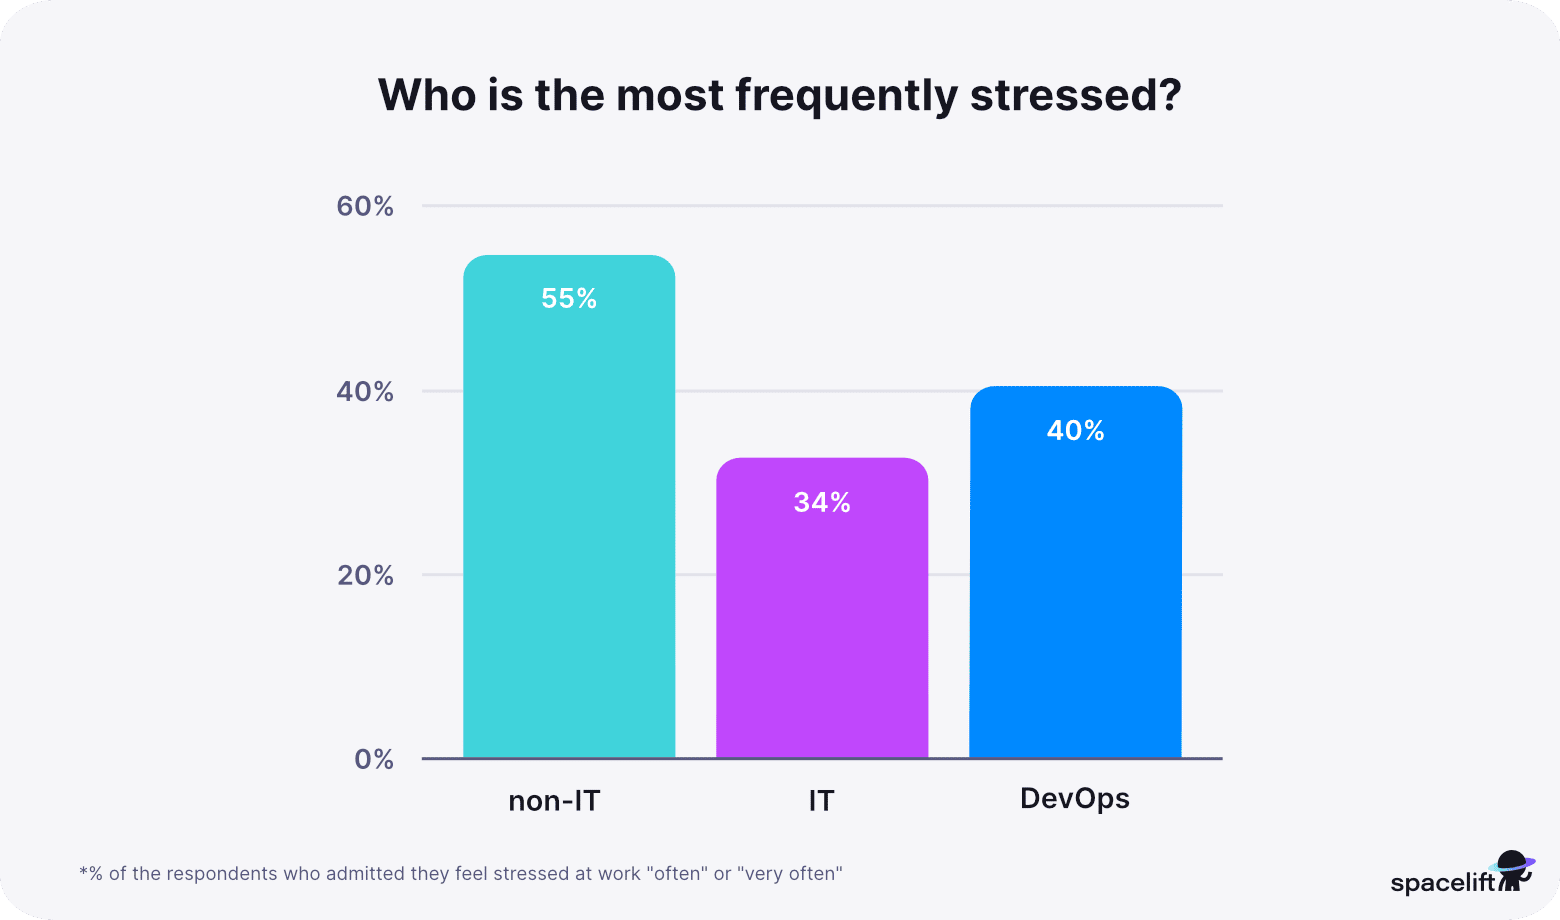 Who is the most frequently stressed